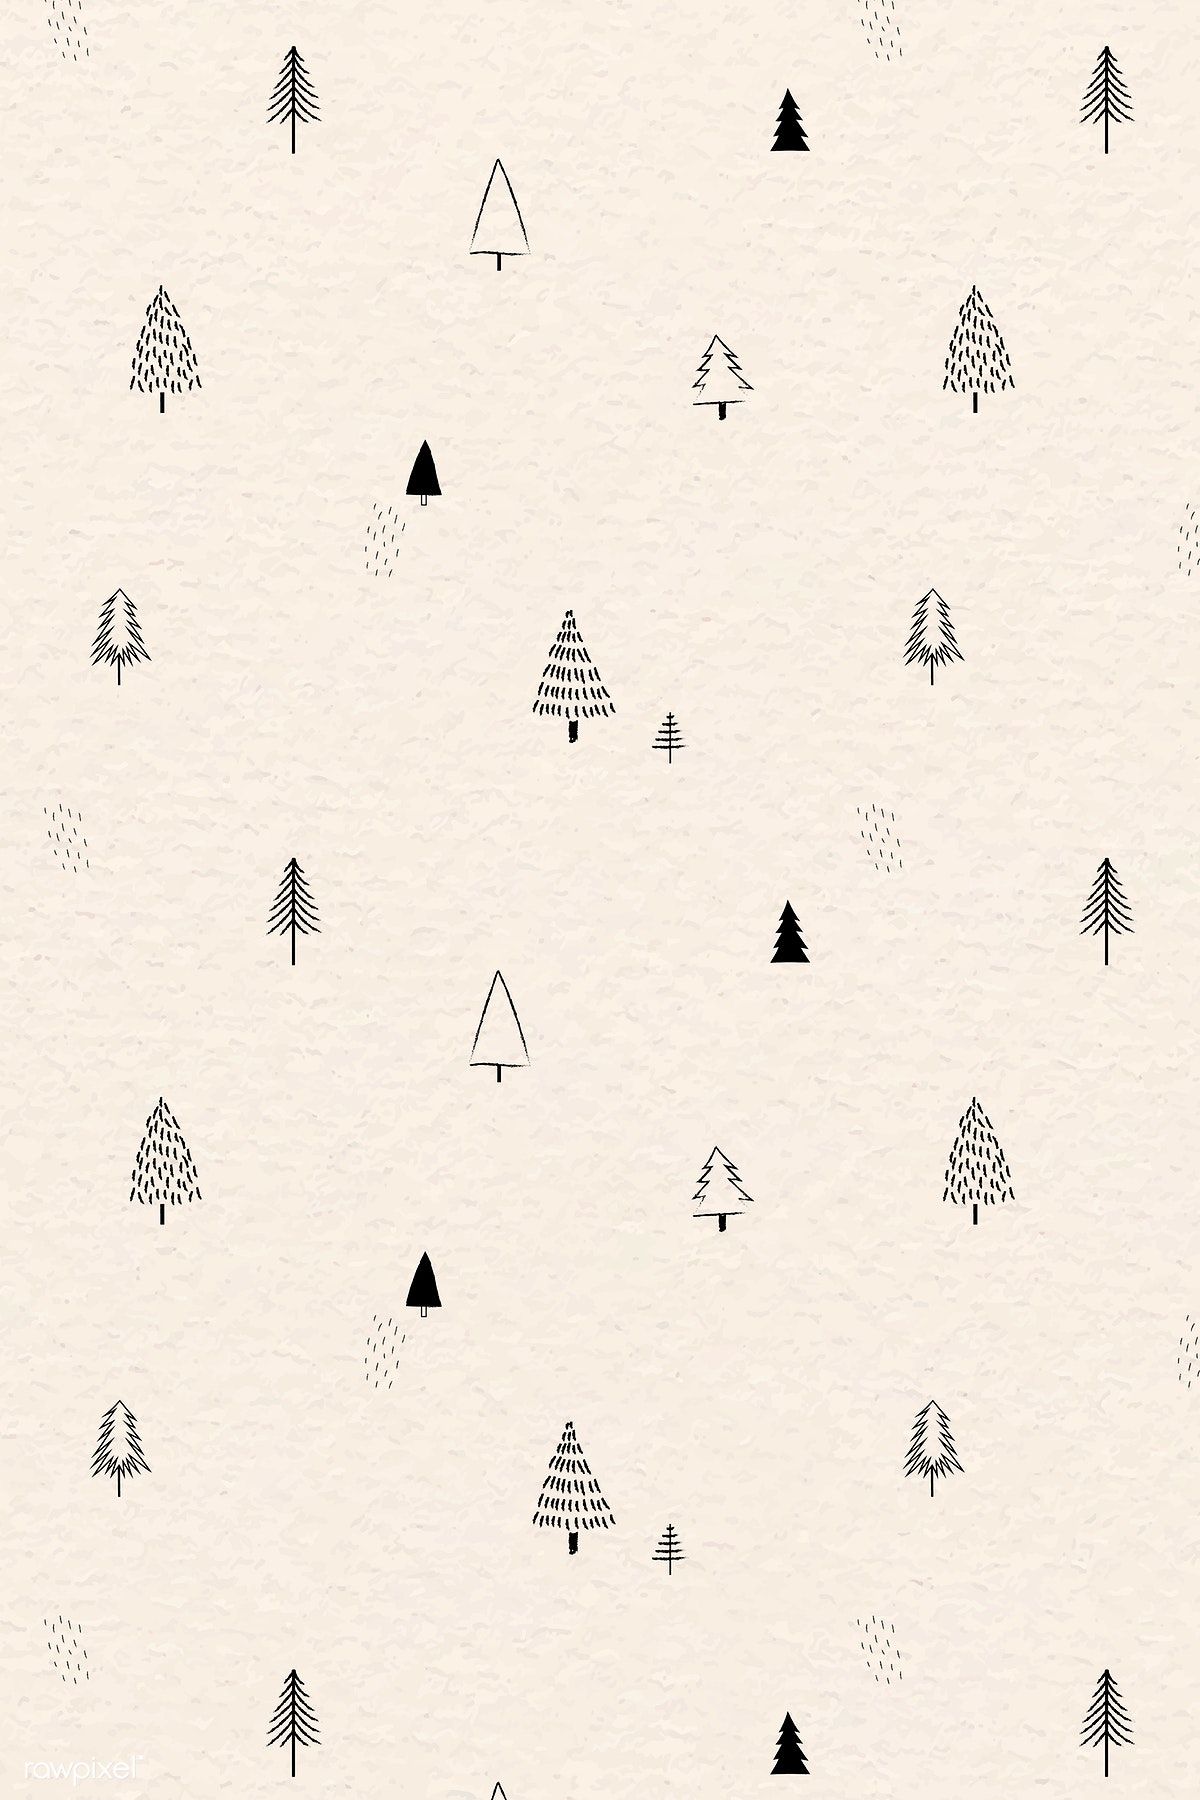 Download premium vector of Christmas elements seamless pattern vector. Cute christmas wallpaper, Christmas tree wallpaper, Christmas tree wallpaper iphone